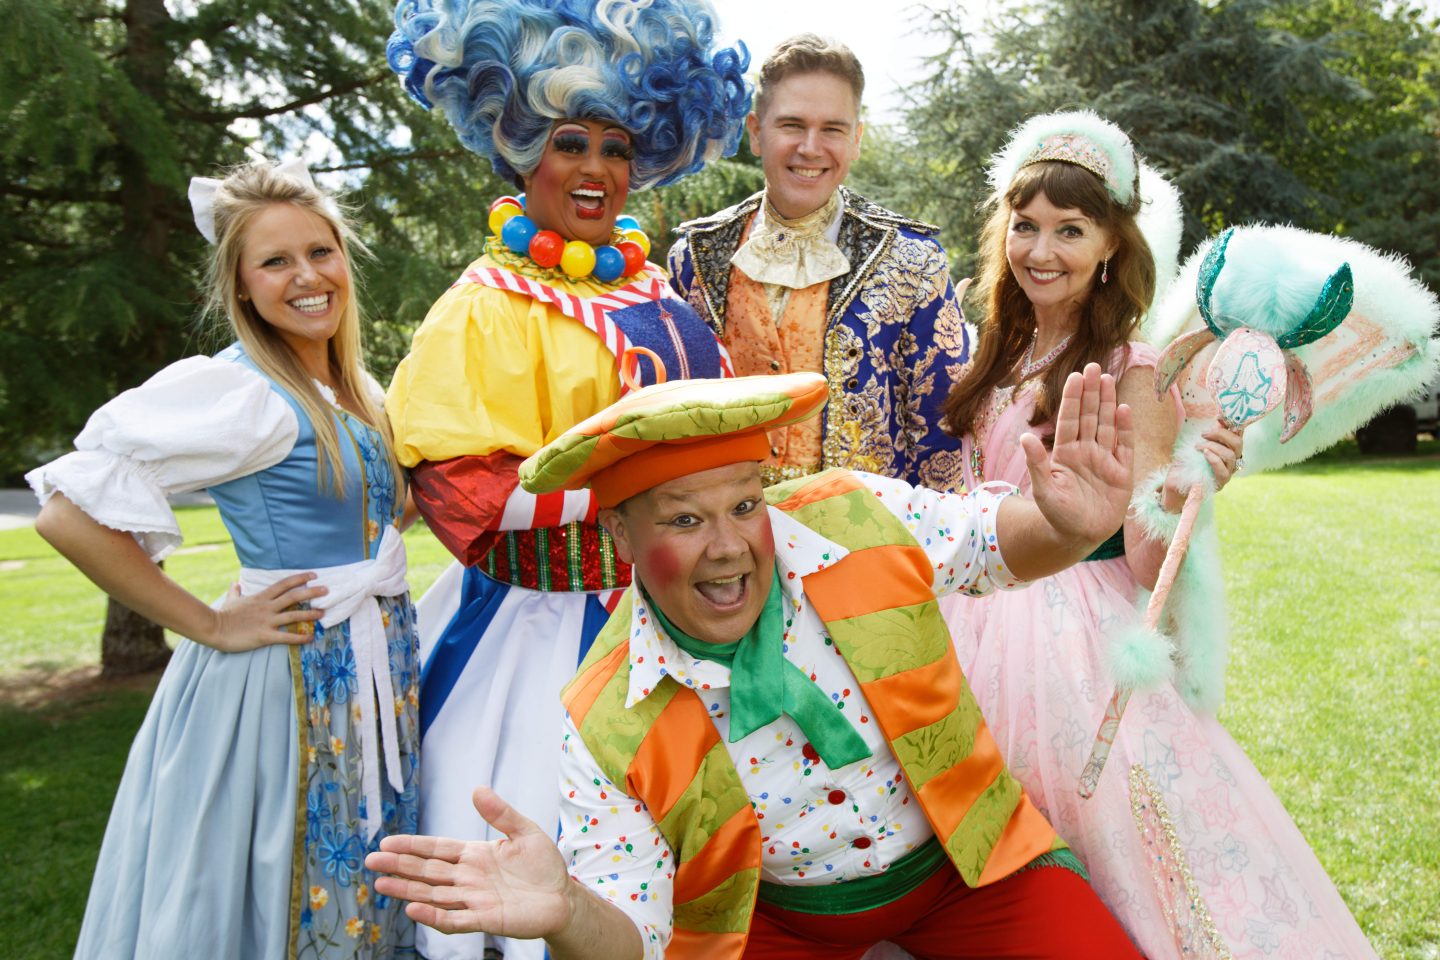 Beauty and the Beast Pantomime at Malvern Theatres cast with Mark James at the front taken outdoors with green grass and trees behind